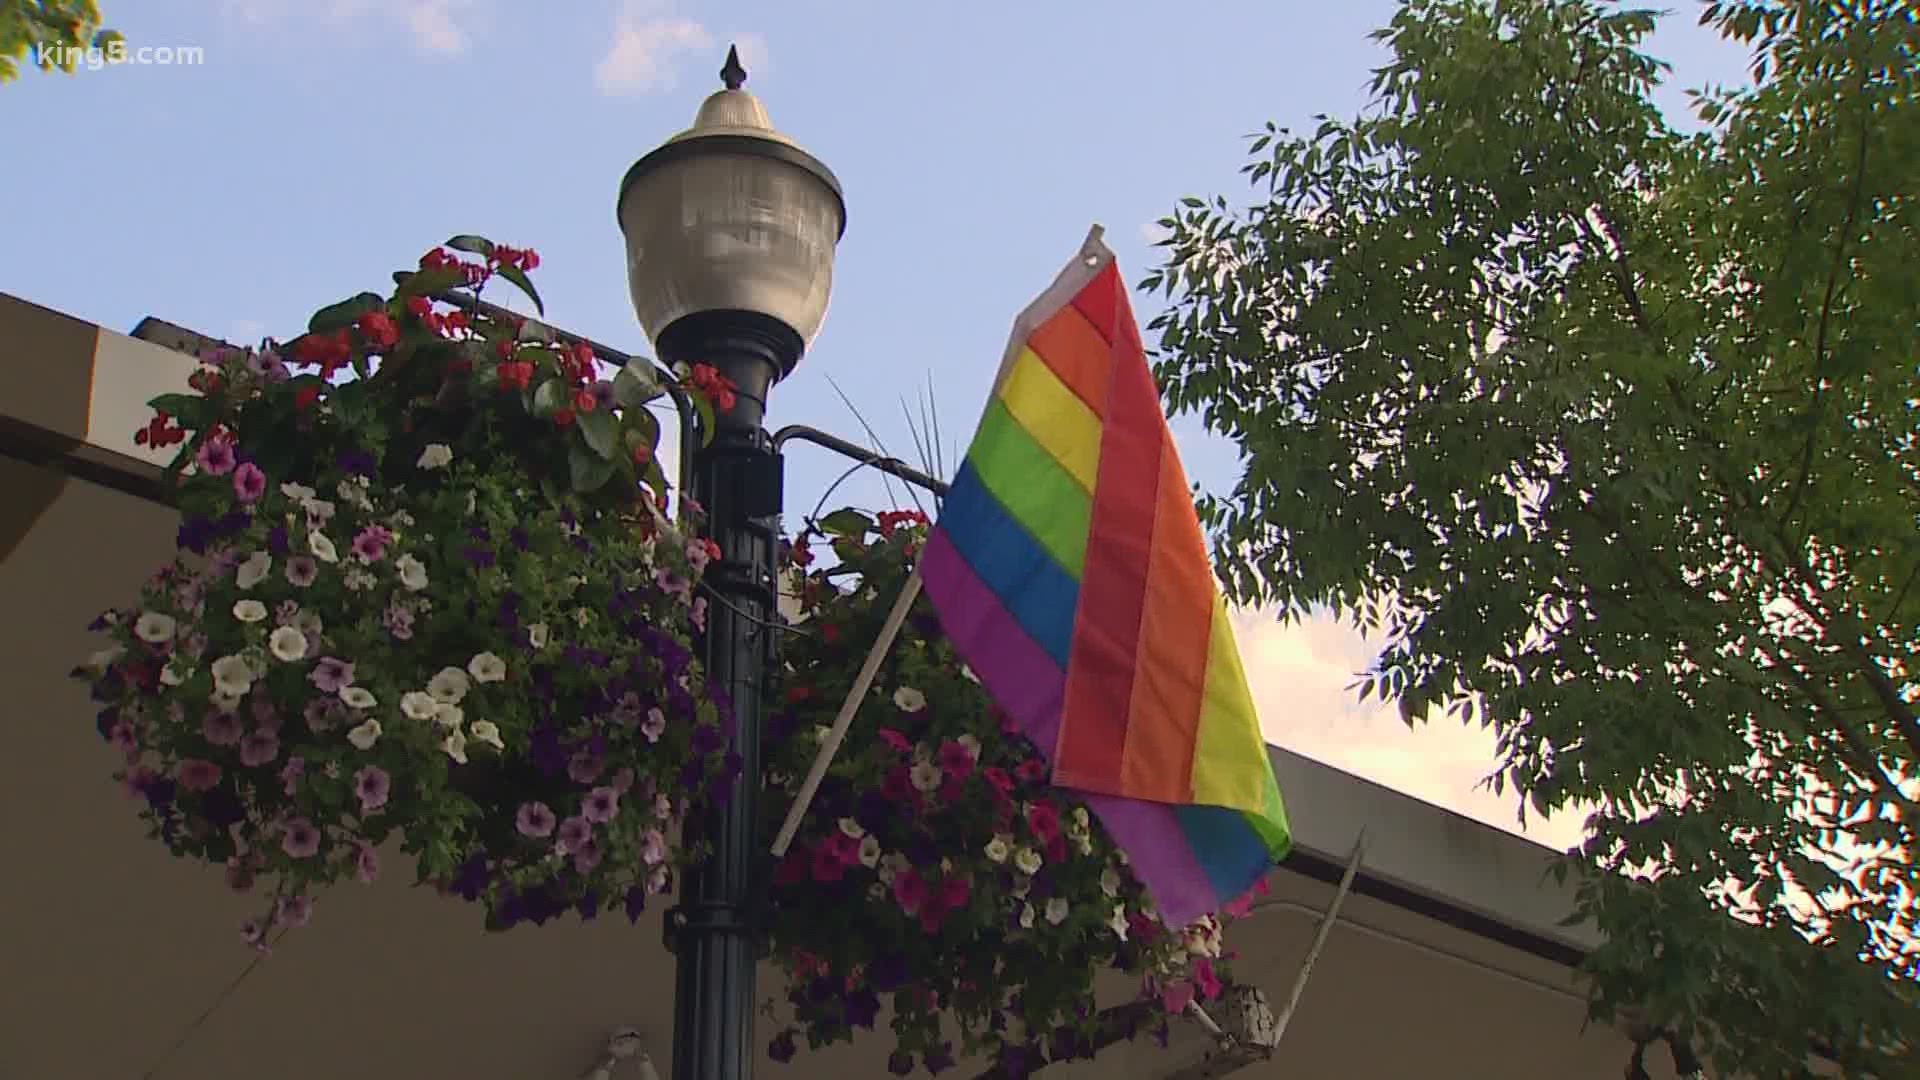 Burien leaders discovered that 38 of the 40 Pride flags installed downtown in honor of Pride Month had been removed and stolen, and now police are investigating.